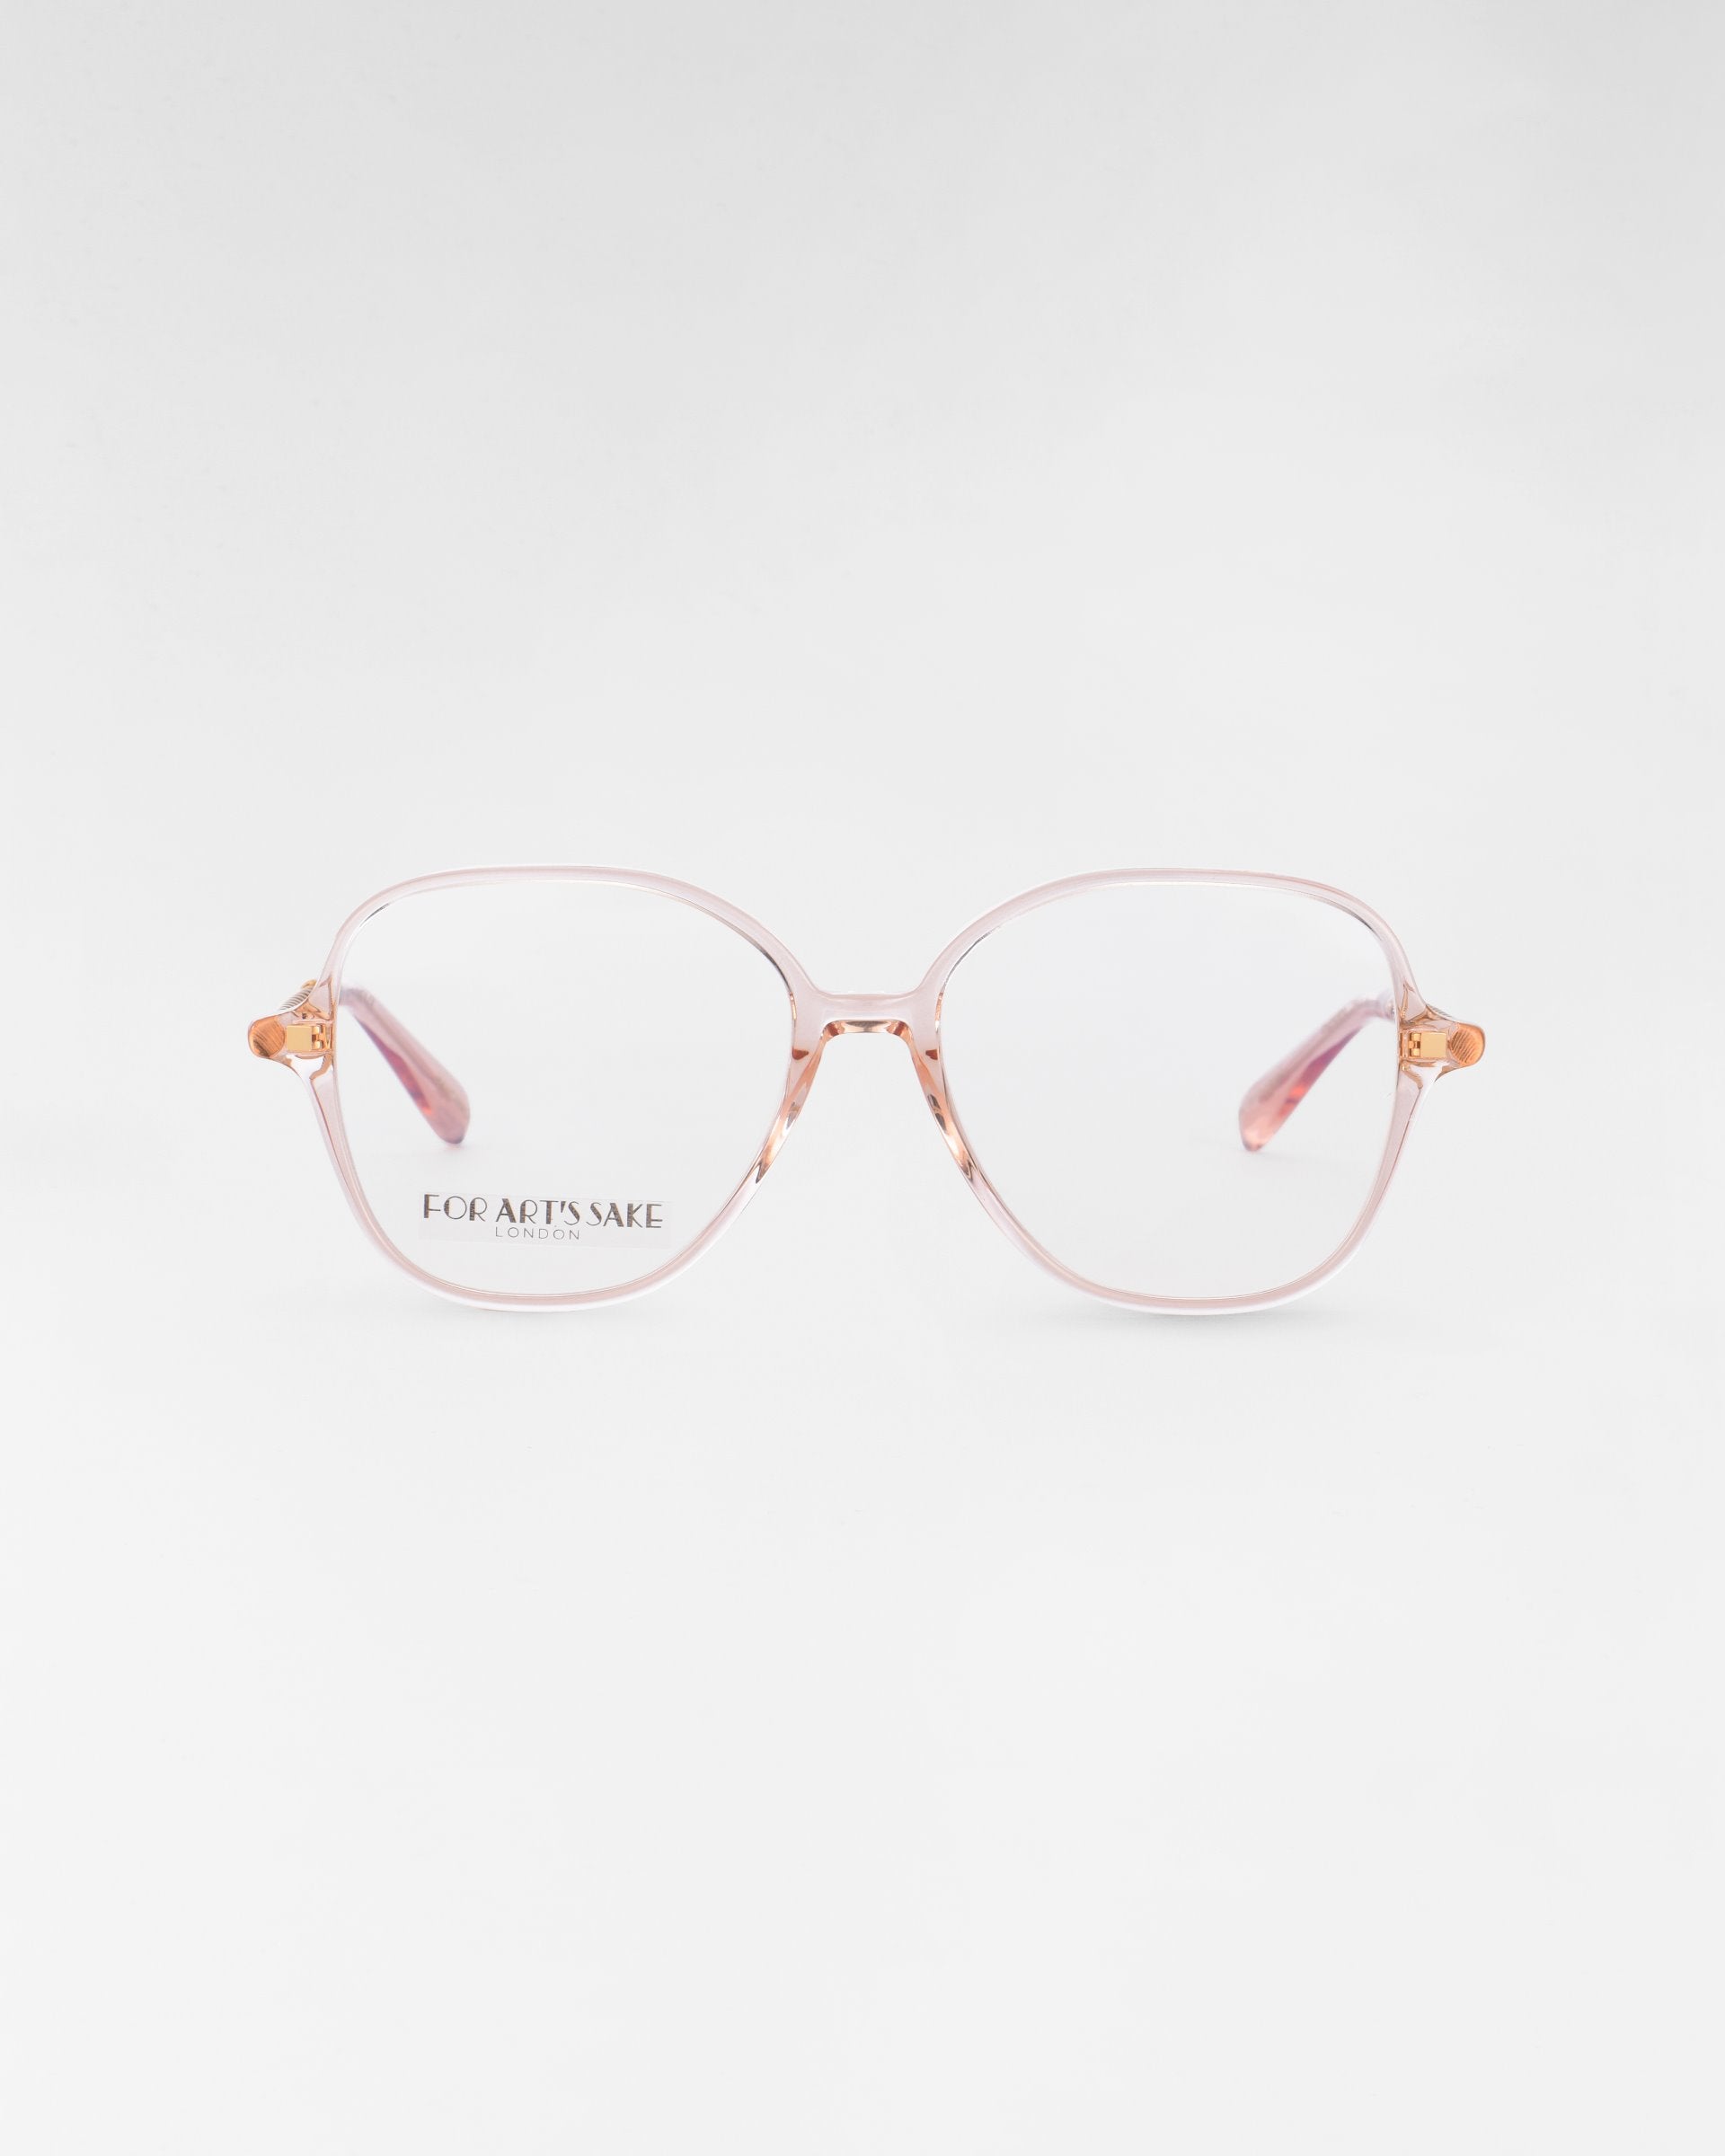 A pair of eyeglasses with large, round lenses and thin, light pink frames. The brand name &quot;For Art&#39;s Sake®&quot; is written in small letters on the left lens. Featuring a blue light filter, these Dumpling glasses are displayed against a plain, white background.